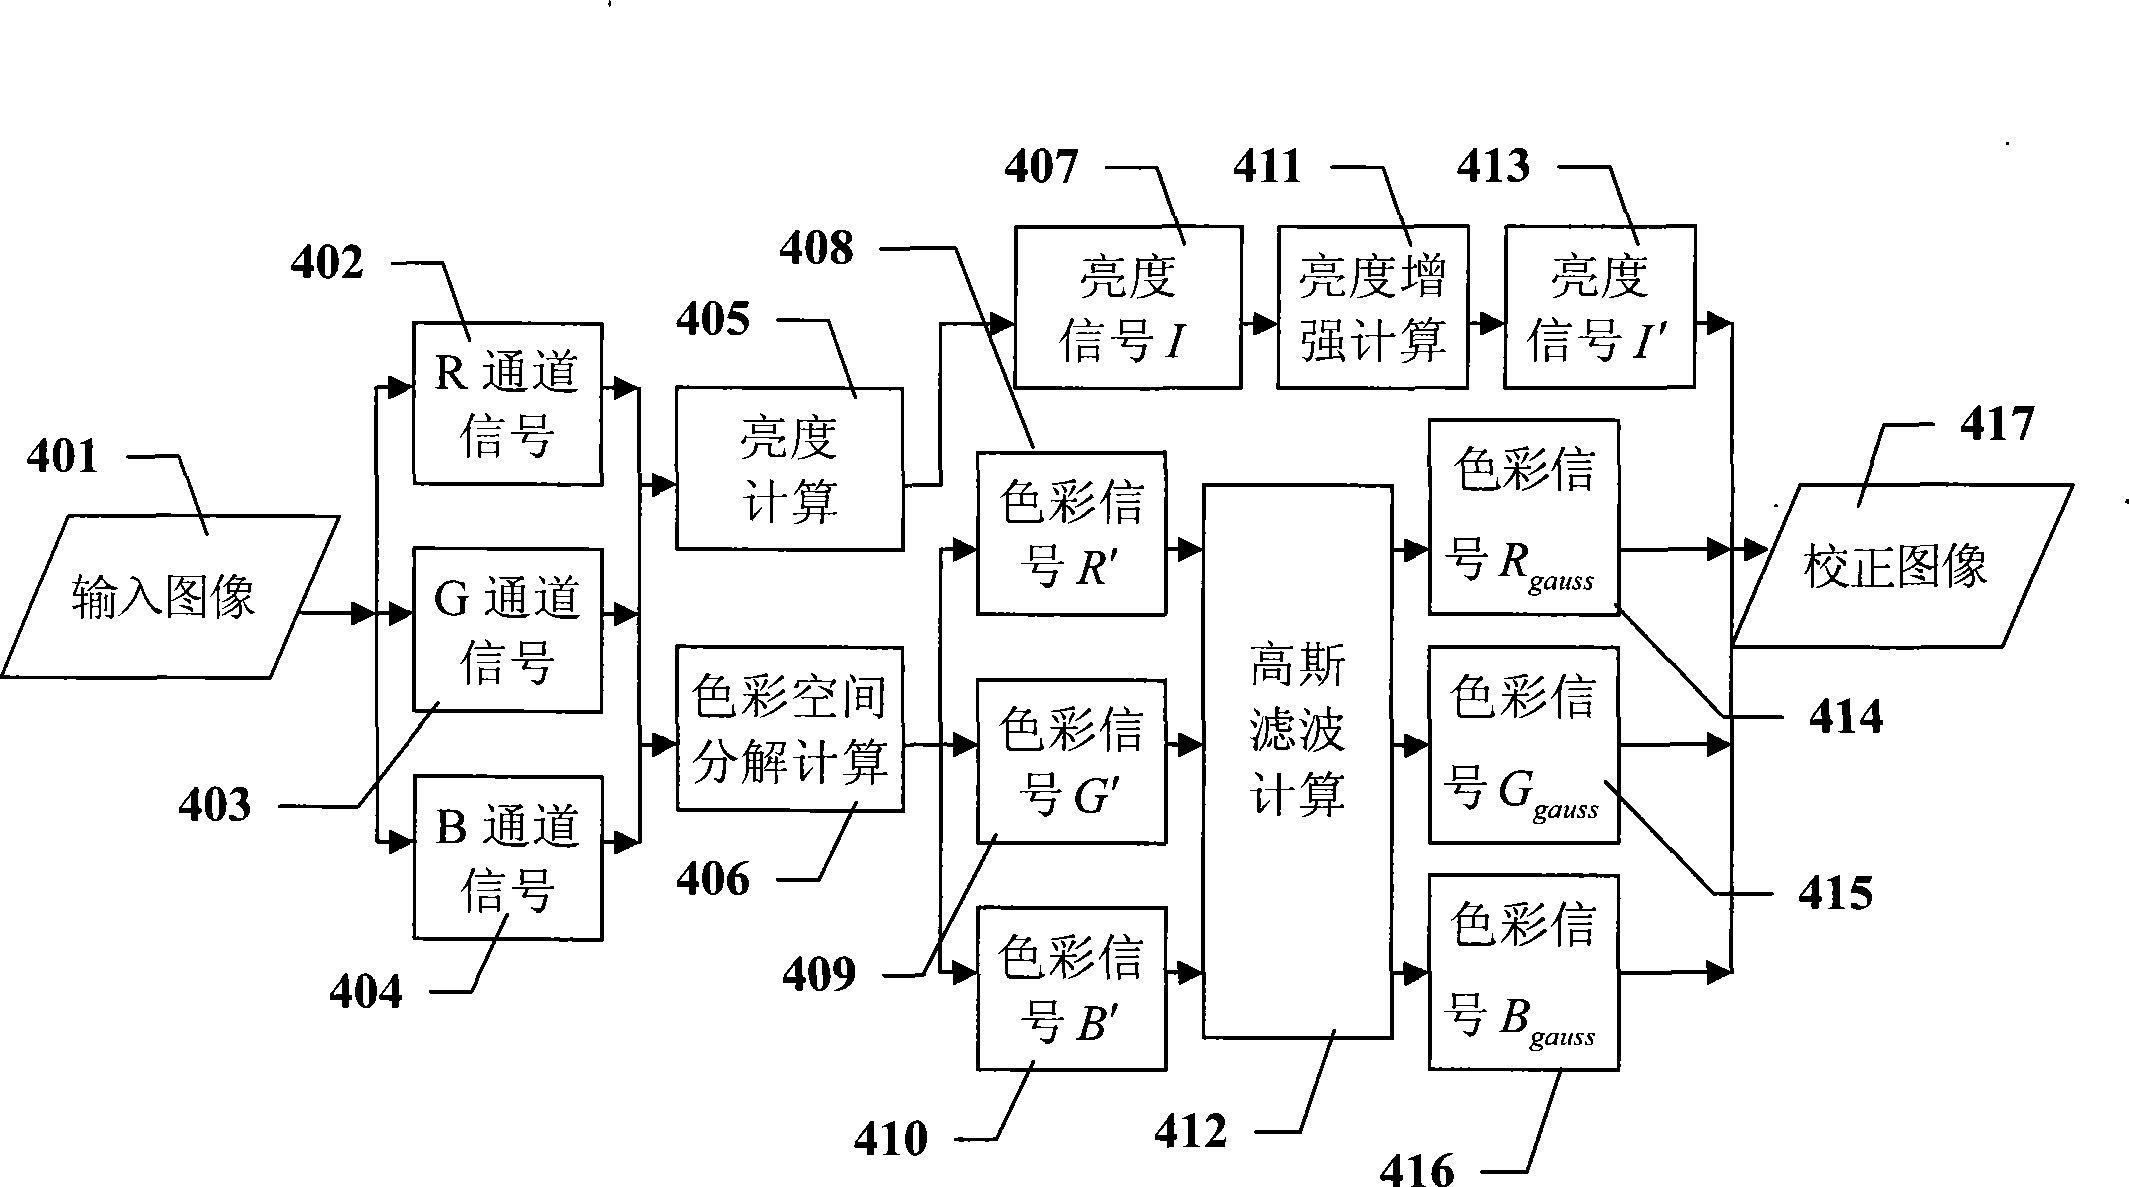 Image irradiation correcting method based on color domain mapping